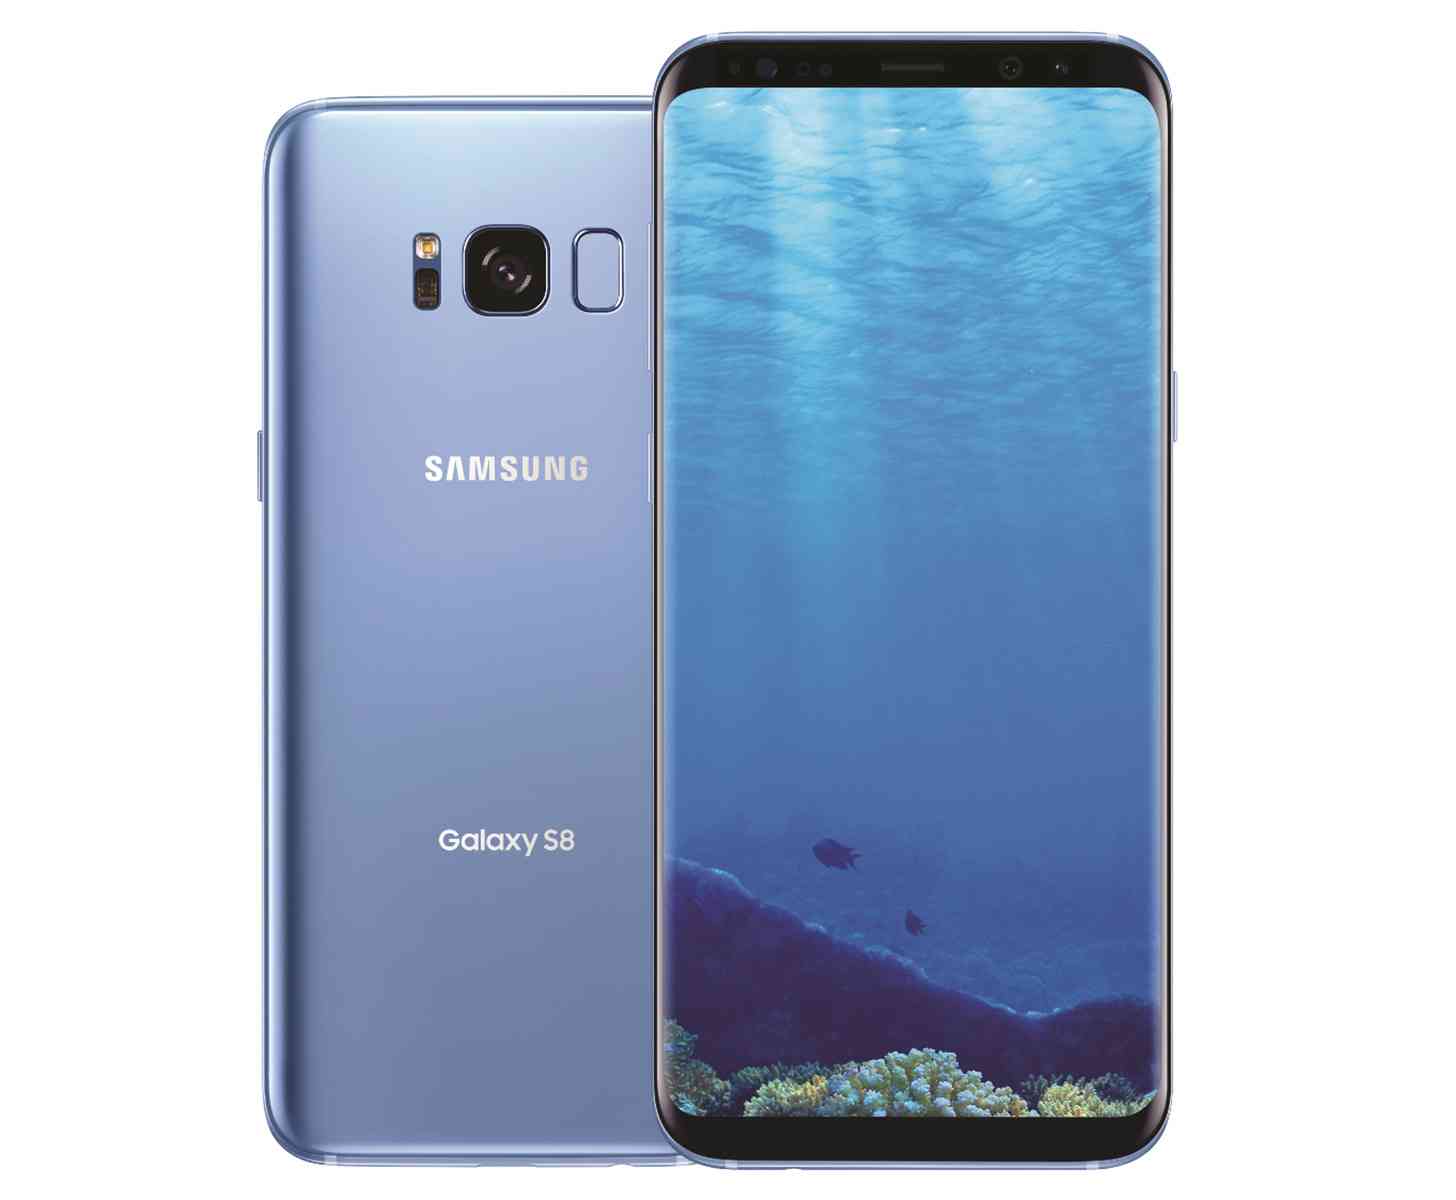 Samsung Galaxy S8 Coral Blue official images